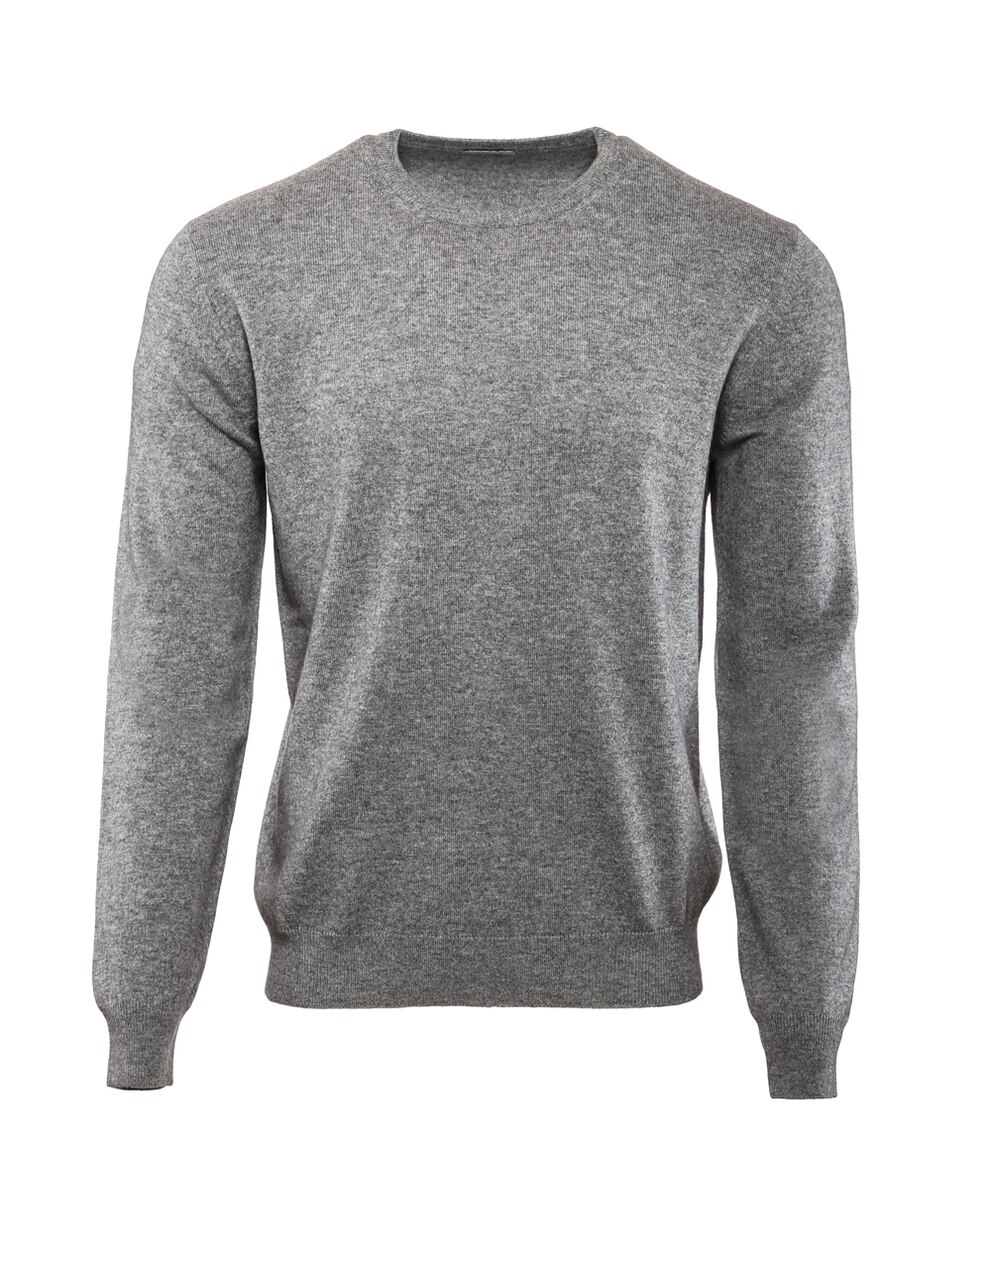 Malo Cashmere Sweaters for Men - Avalon Clothing Company